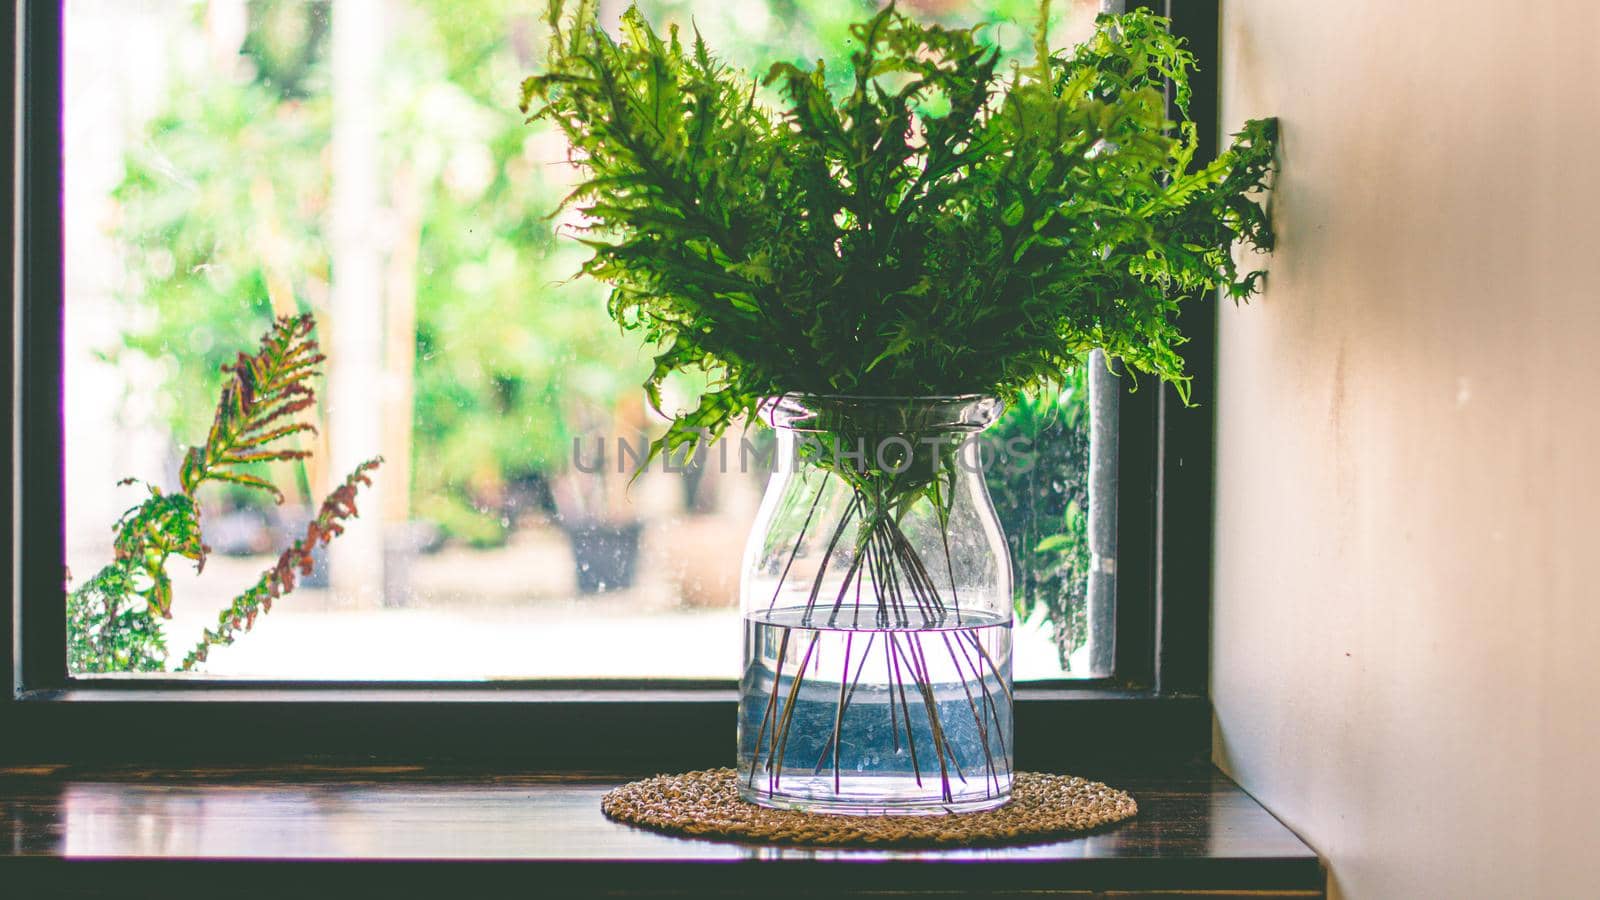 Green Fern Leaves In Glass Vase decorate next glass window